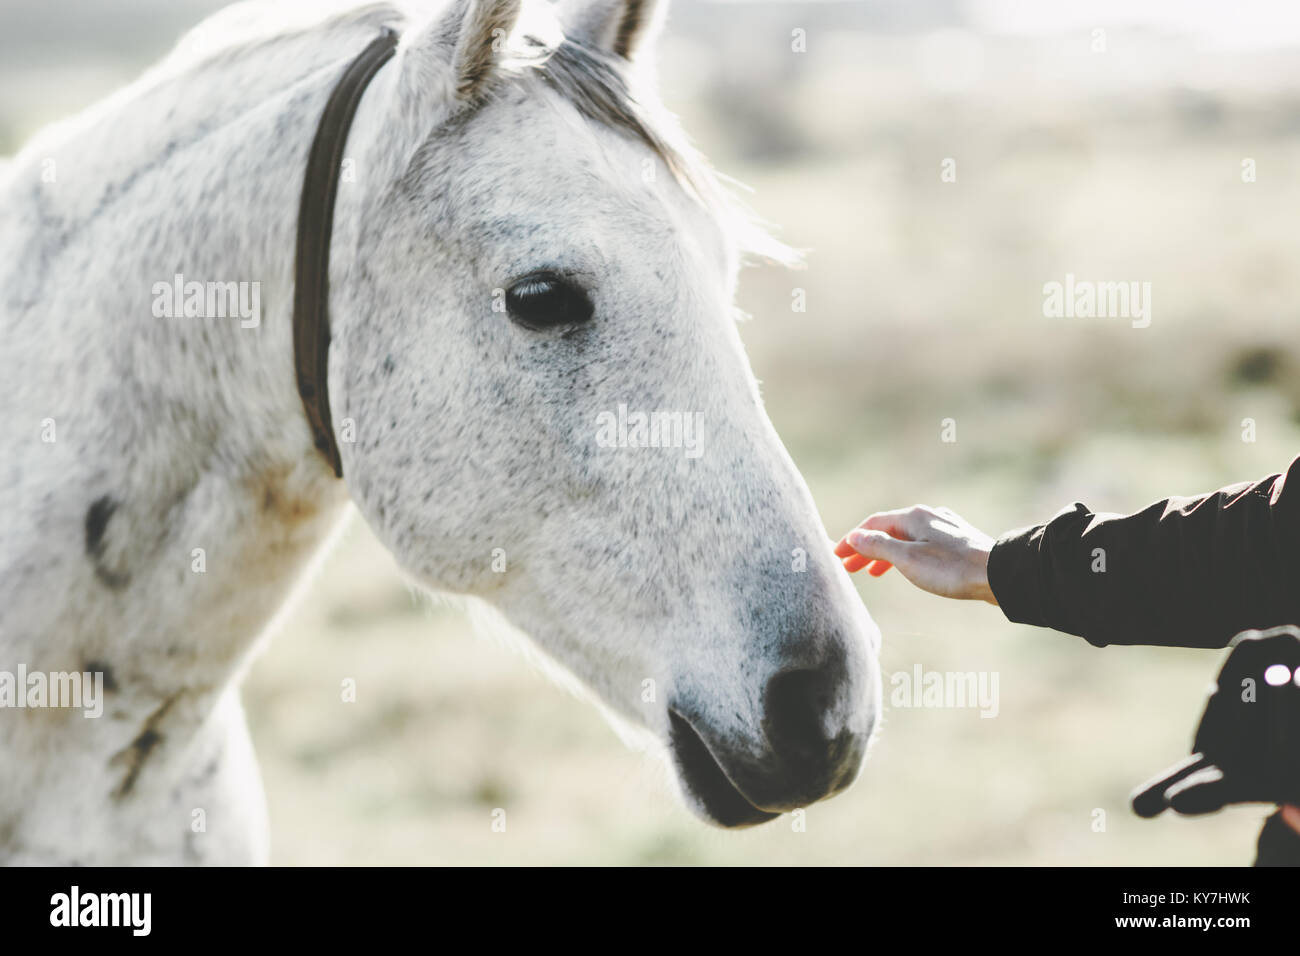 White Horse head hand touching Lifestyle animal and people friendship kindness concept Stock Photo